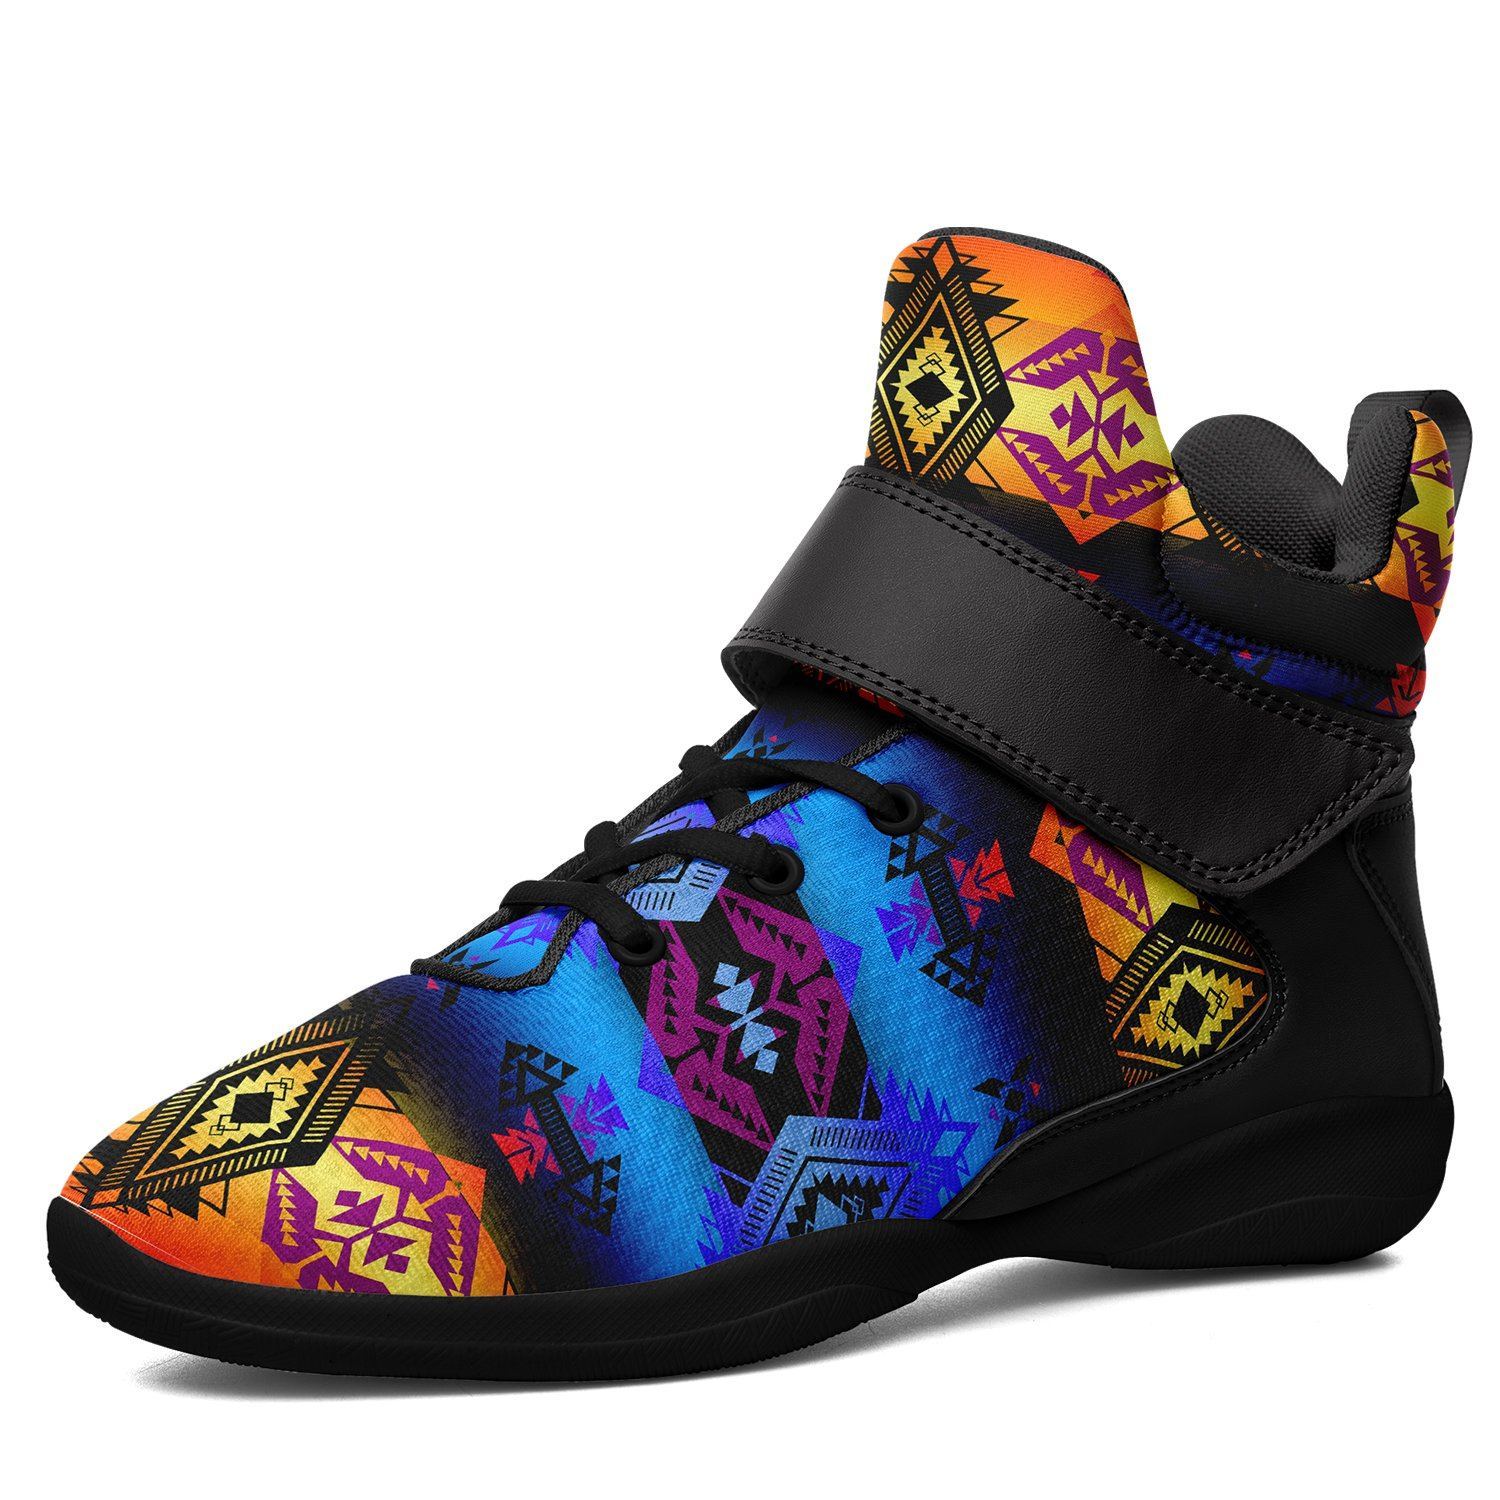 Sovereign Nation Sunset Ipottaa Basketball / Sport High Top Shoes - Black Sole 49 Dzine US Men 7 / EUR 40 Black Sole with Black Strap 